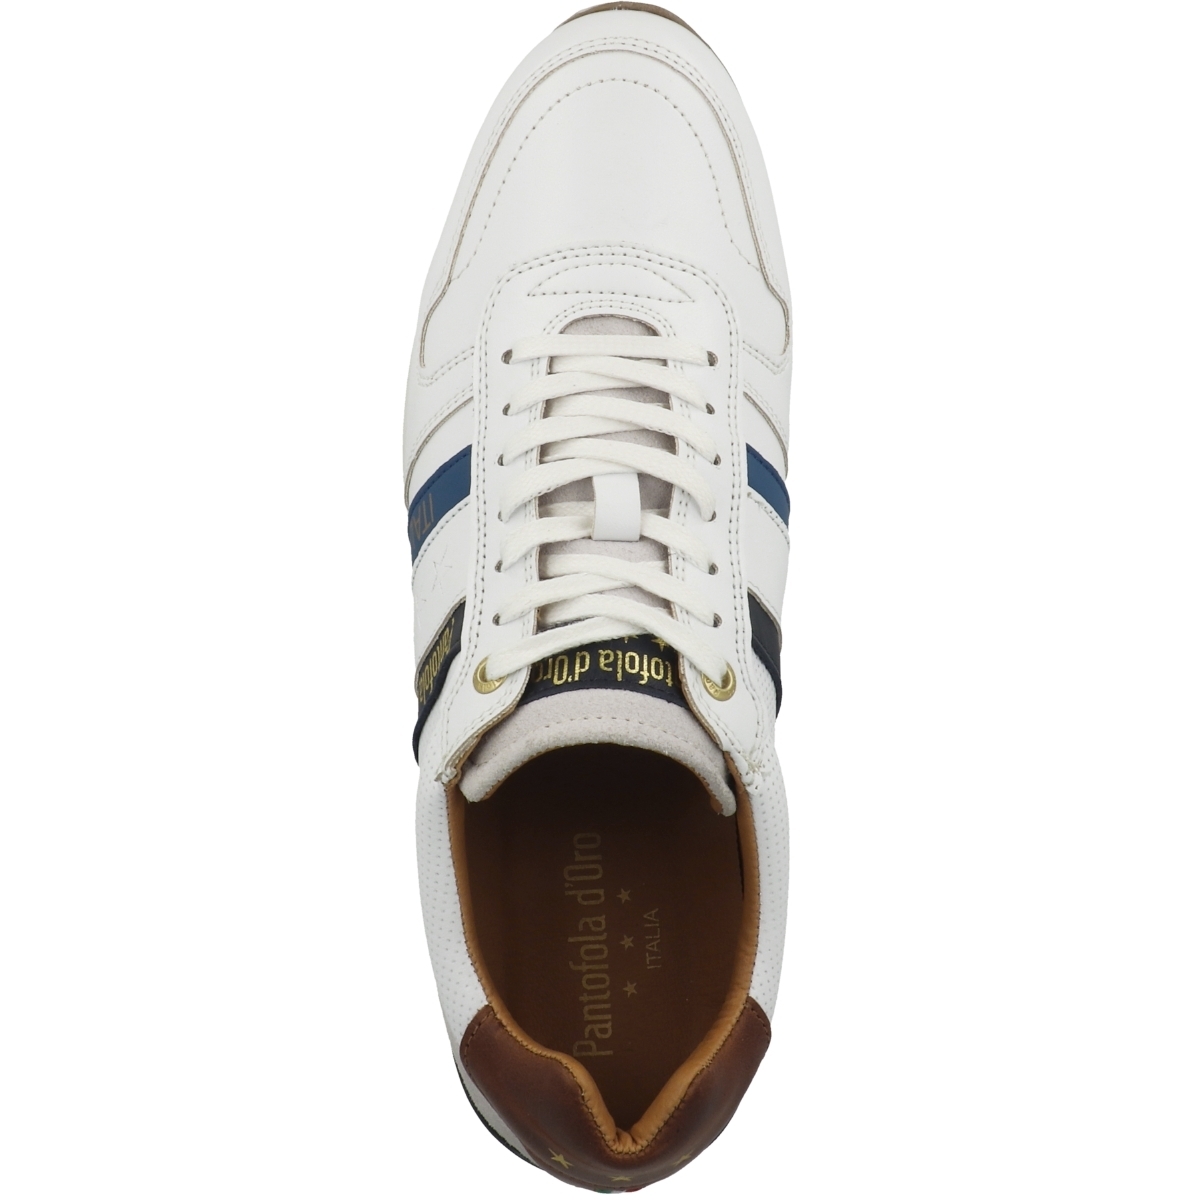 Pantofola d'Oro Rizza Uomo Low Sneaker low weiss